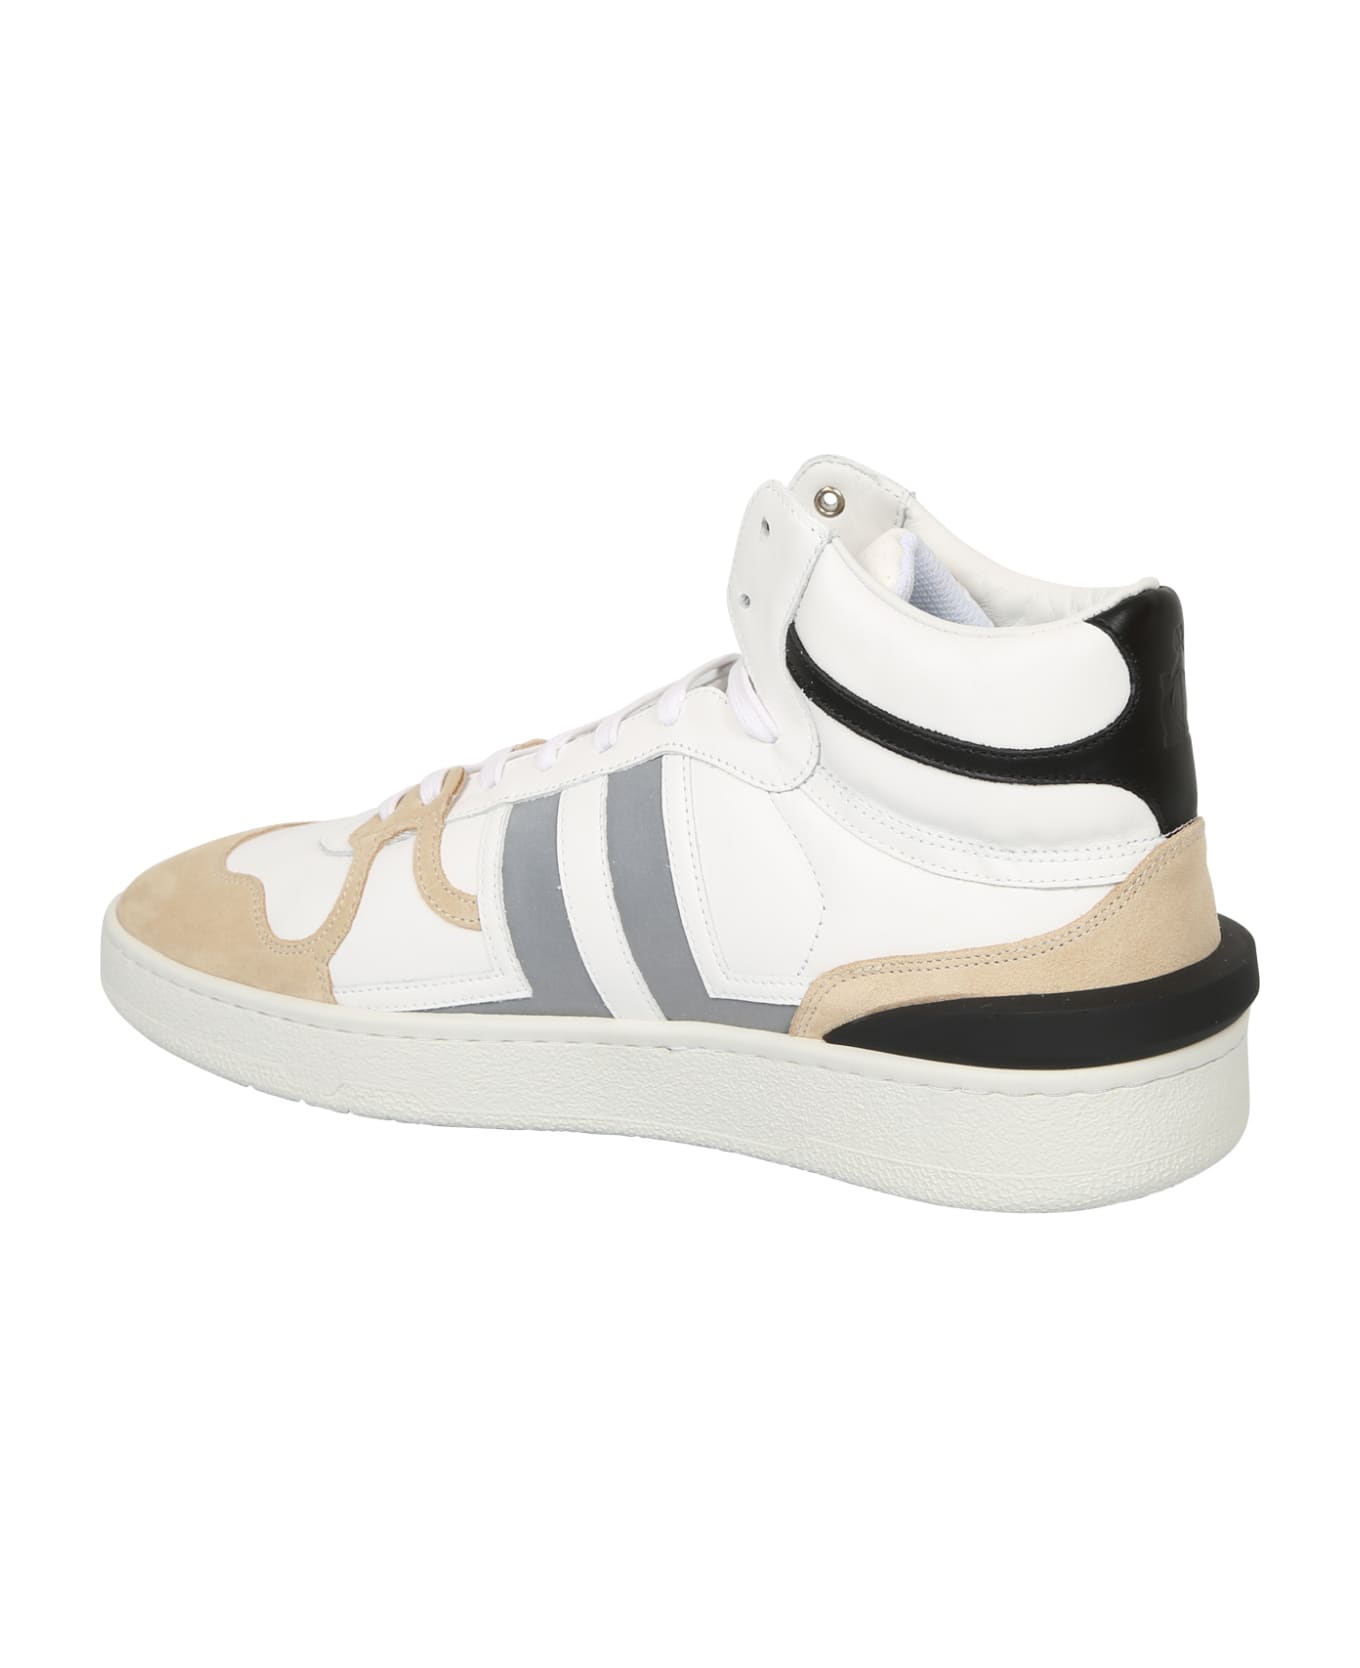 Lanvin Sneakers High Top Clay Bia/arg - White